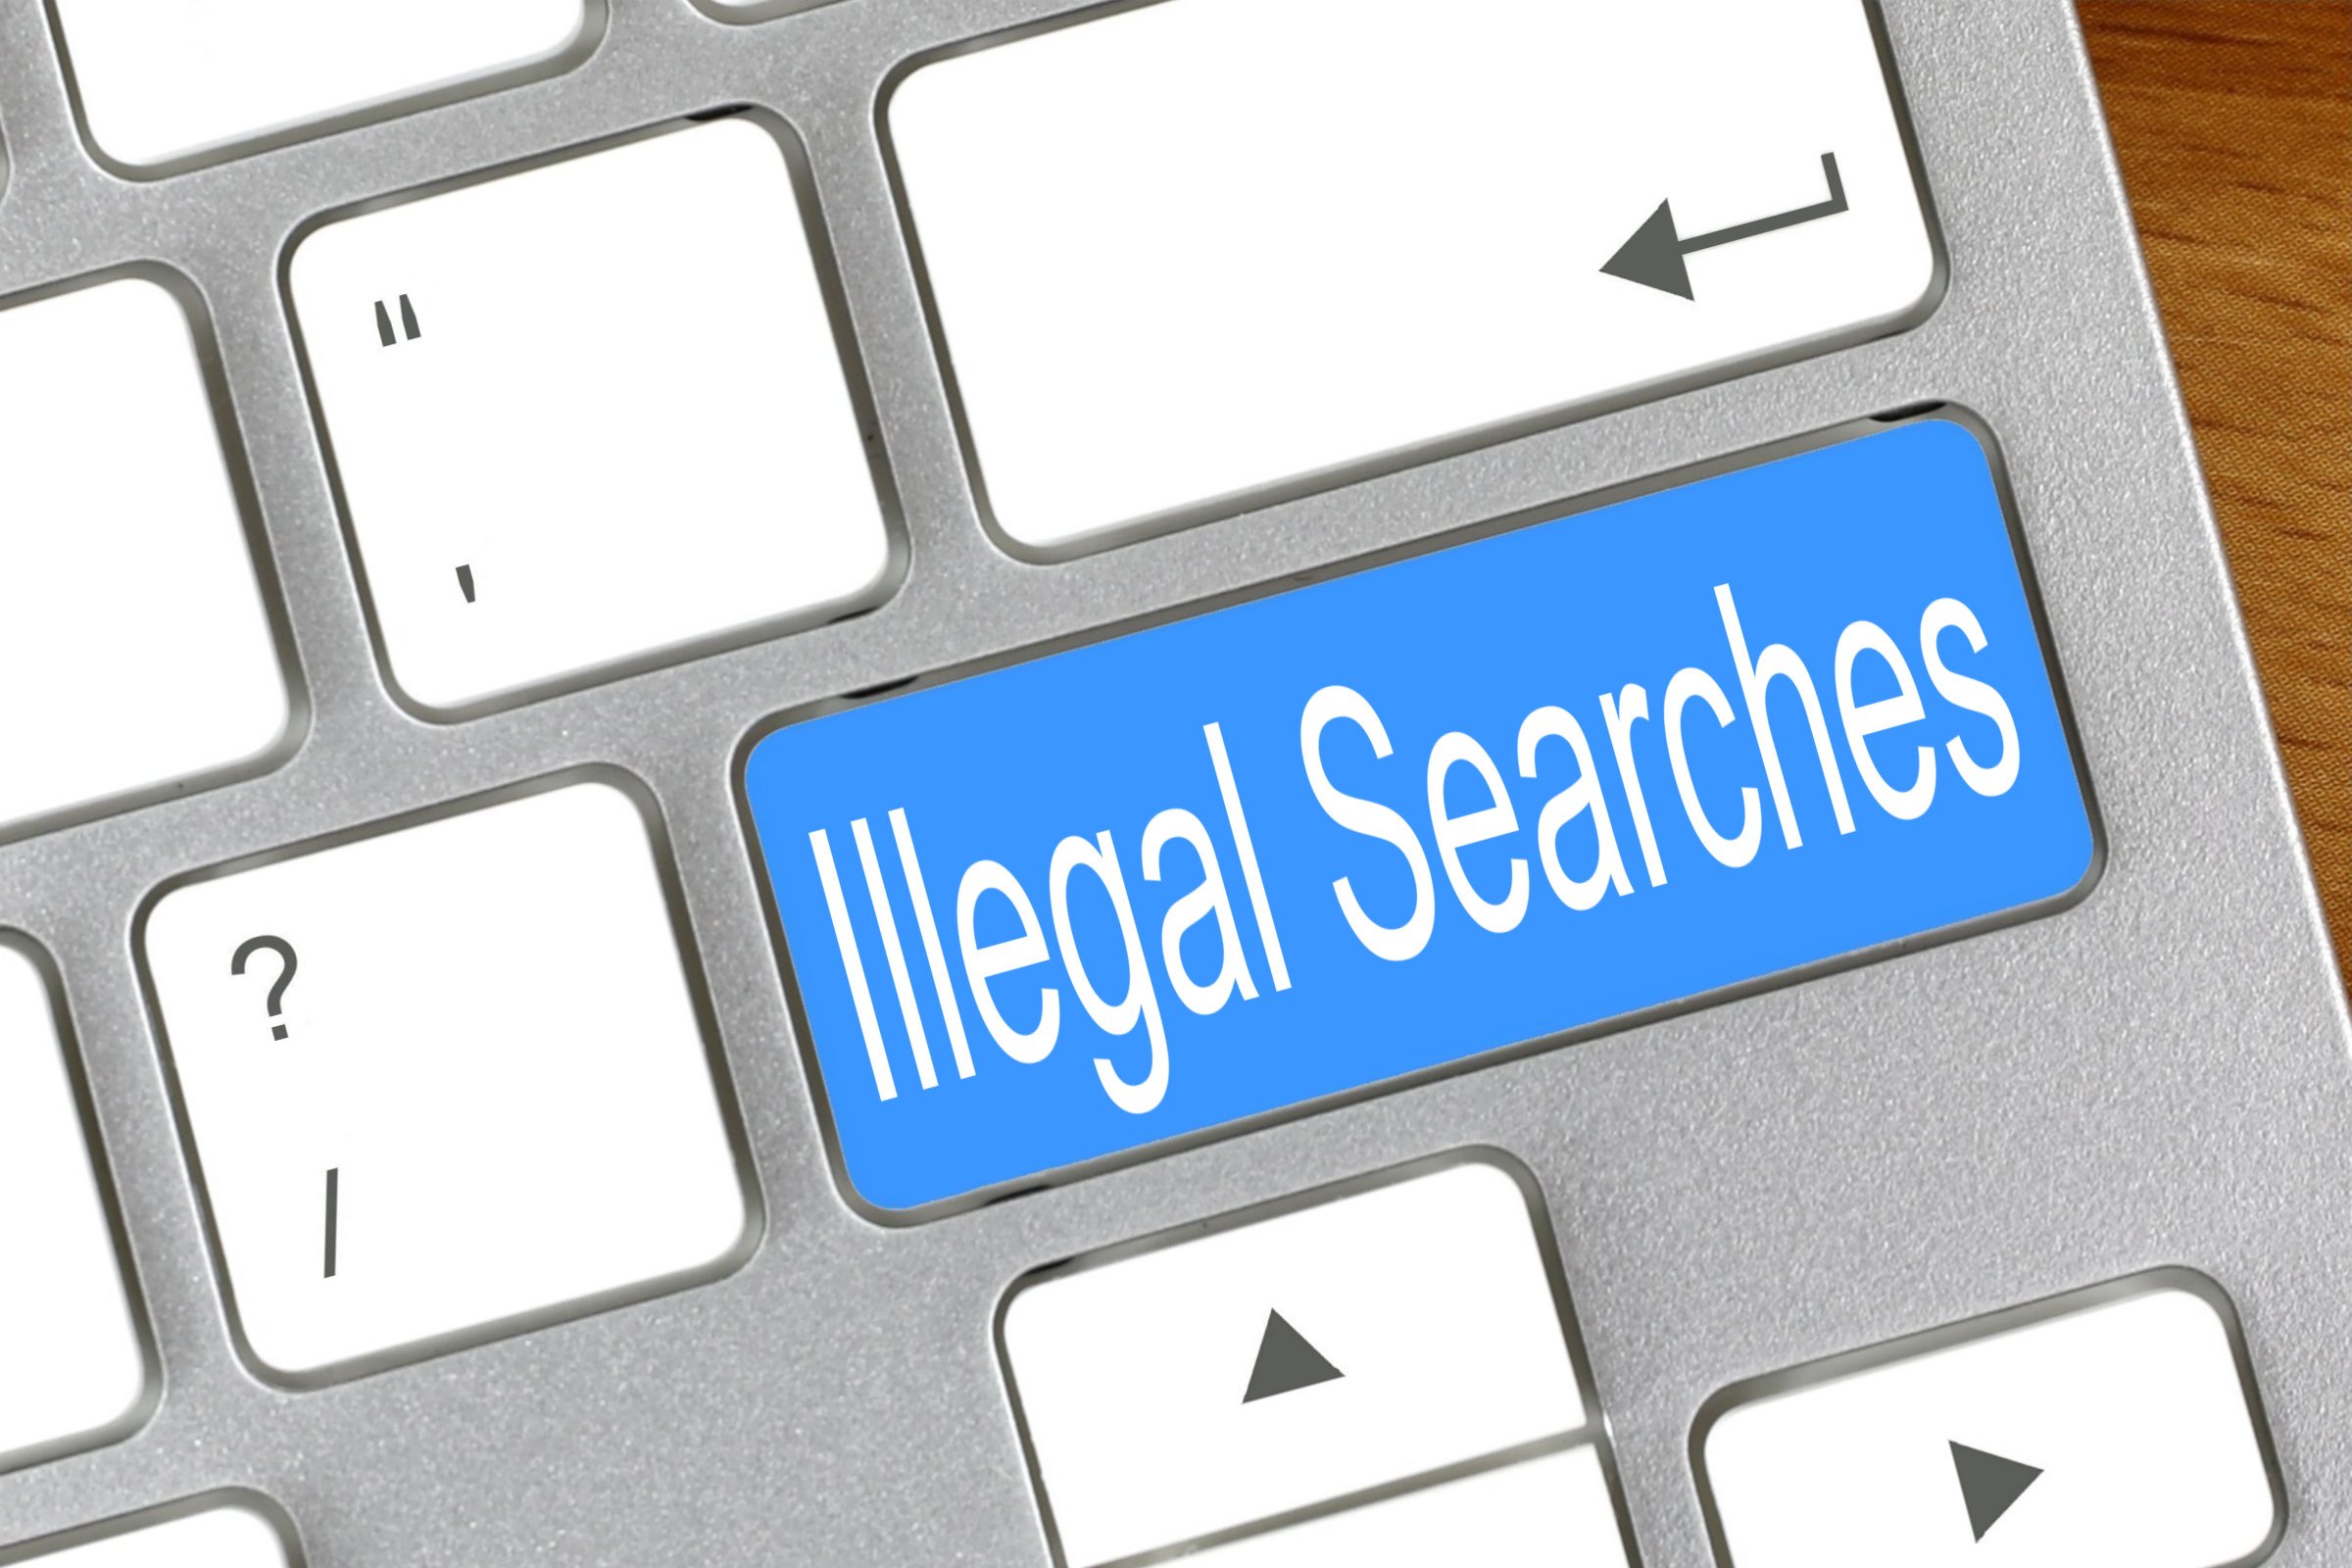 illegal searches